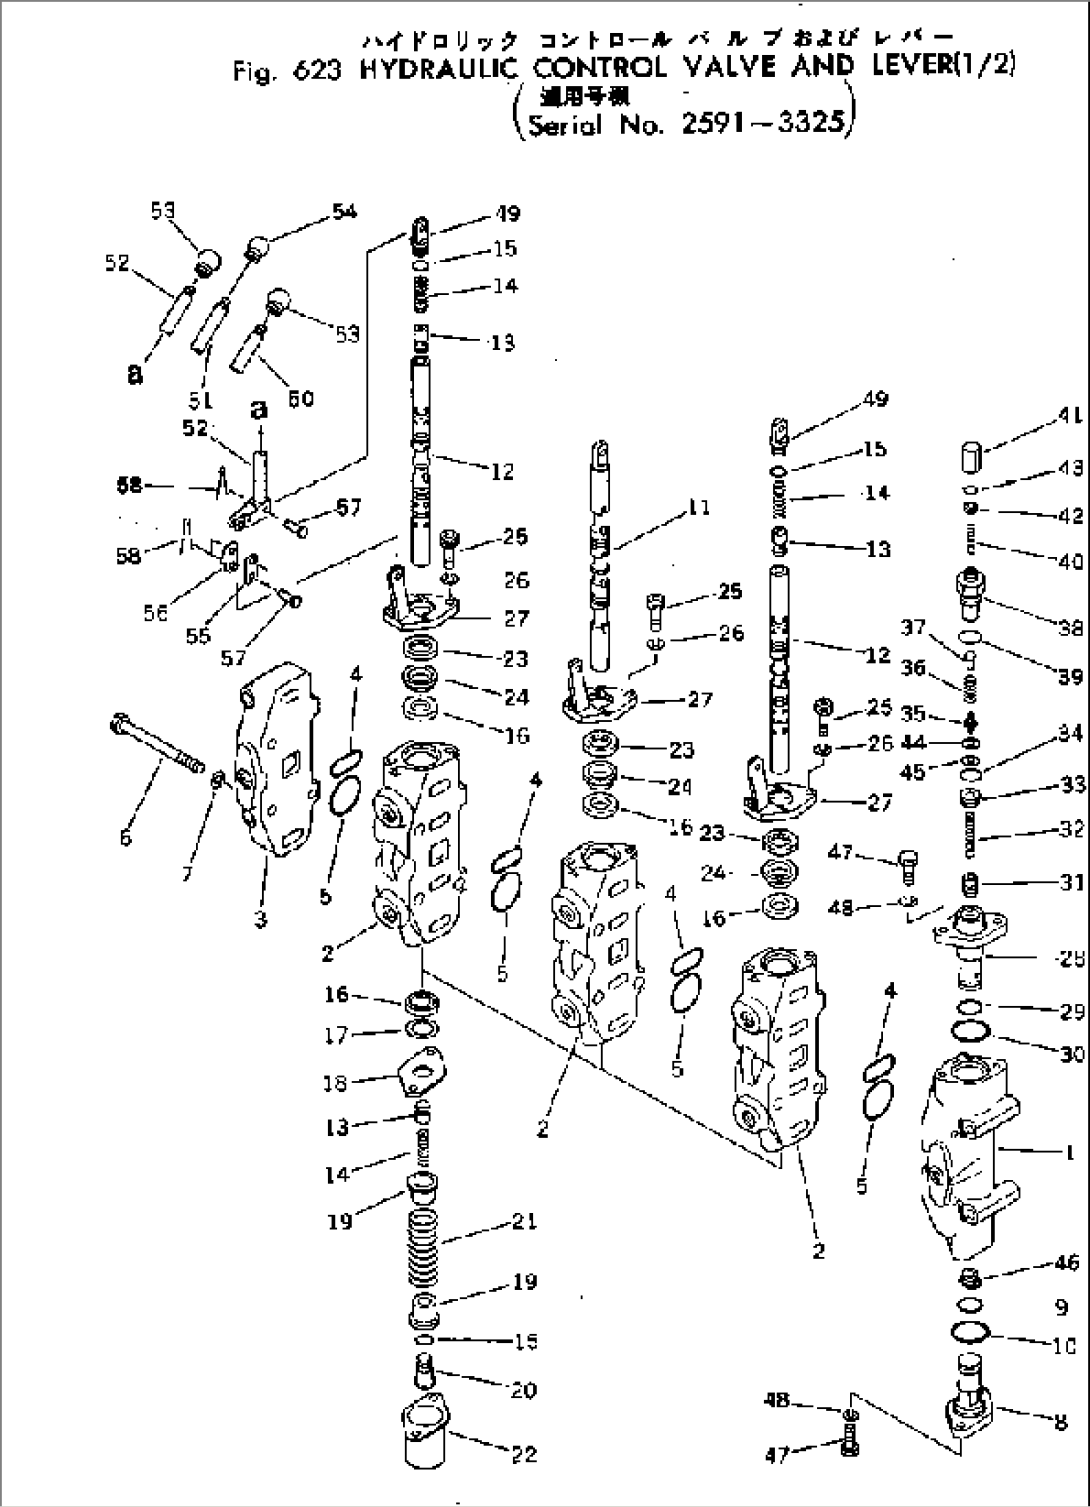 HYDRAULIC CONTROL VALVE AND LEVER (1/2)(#2591-3325)